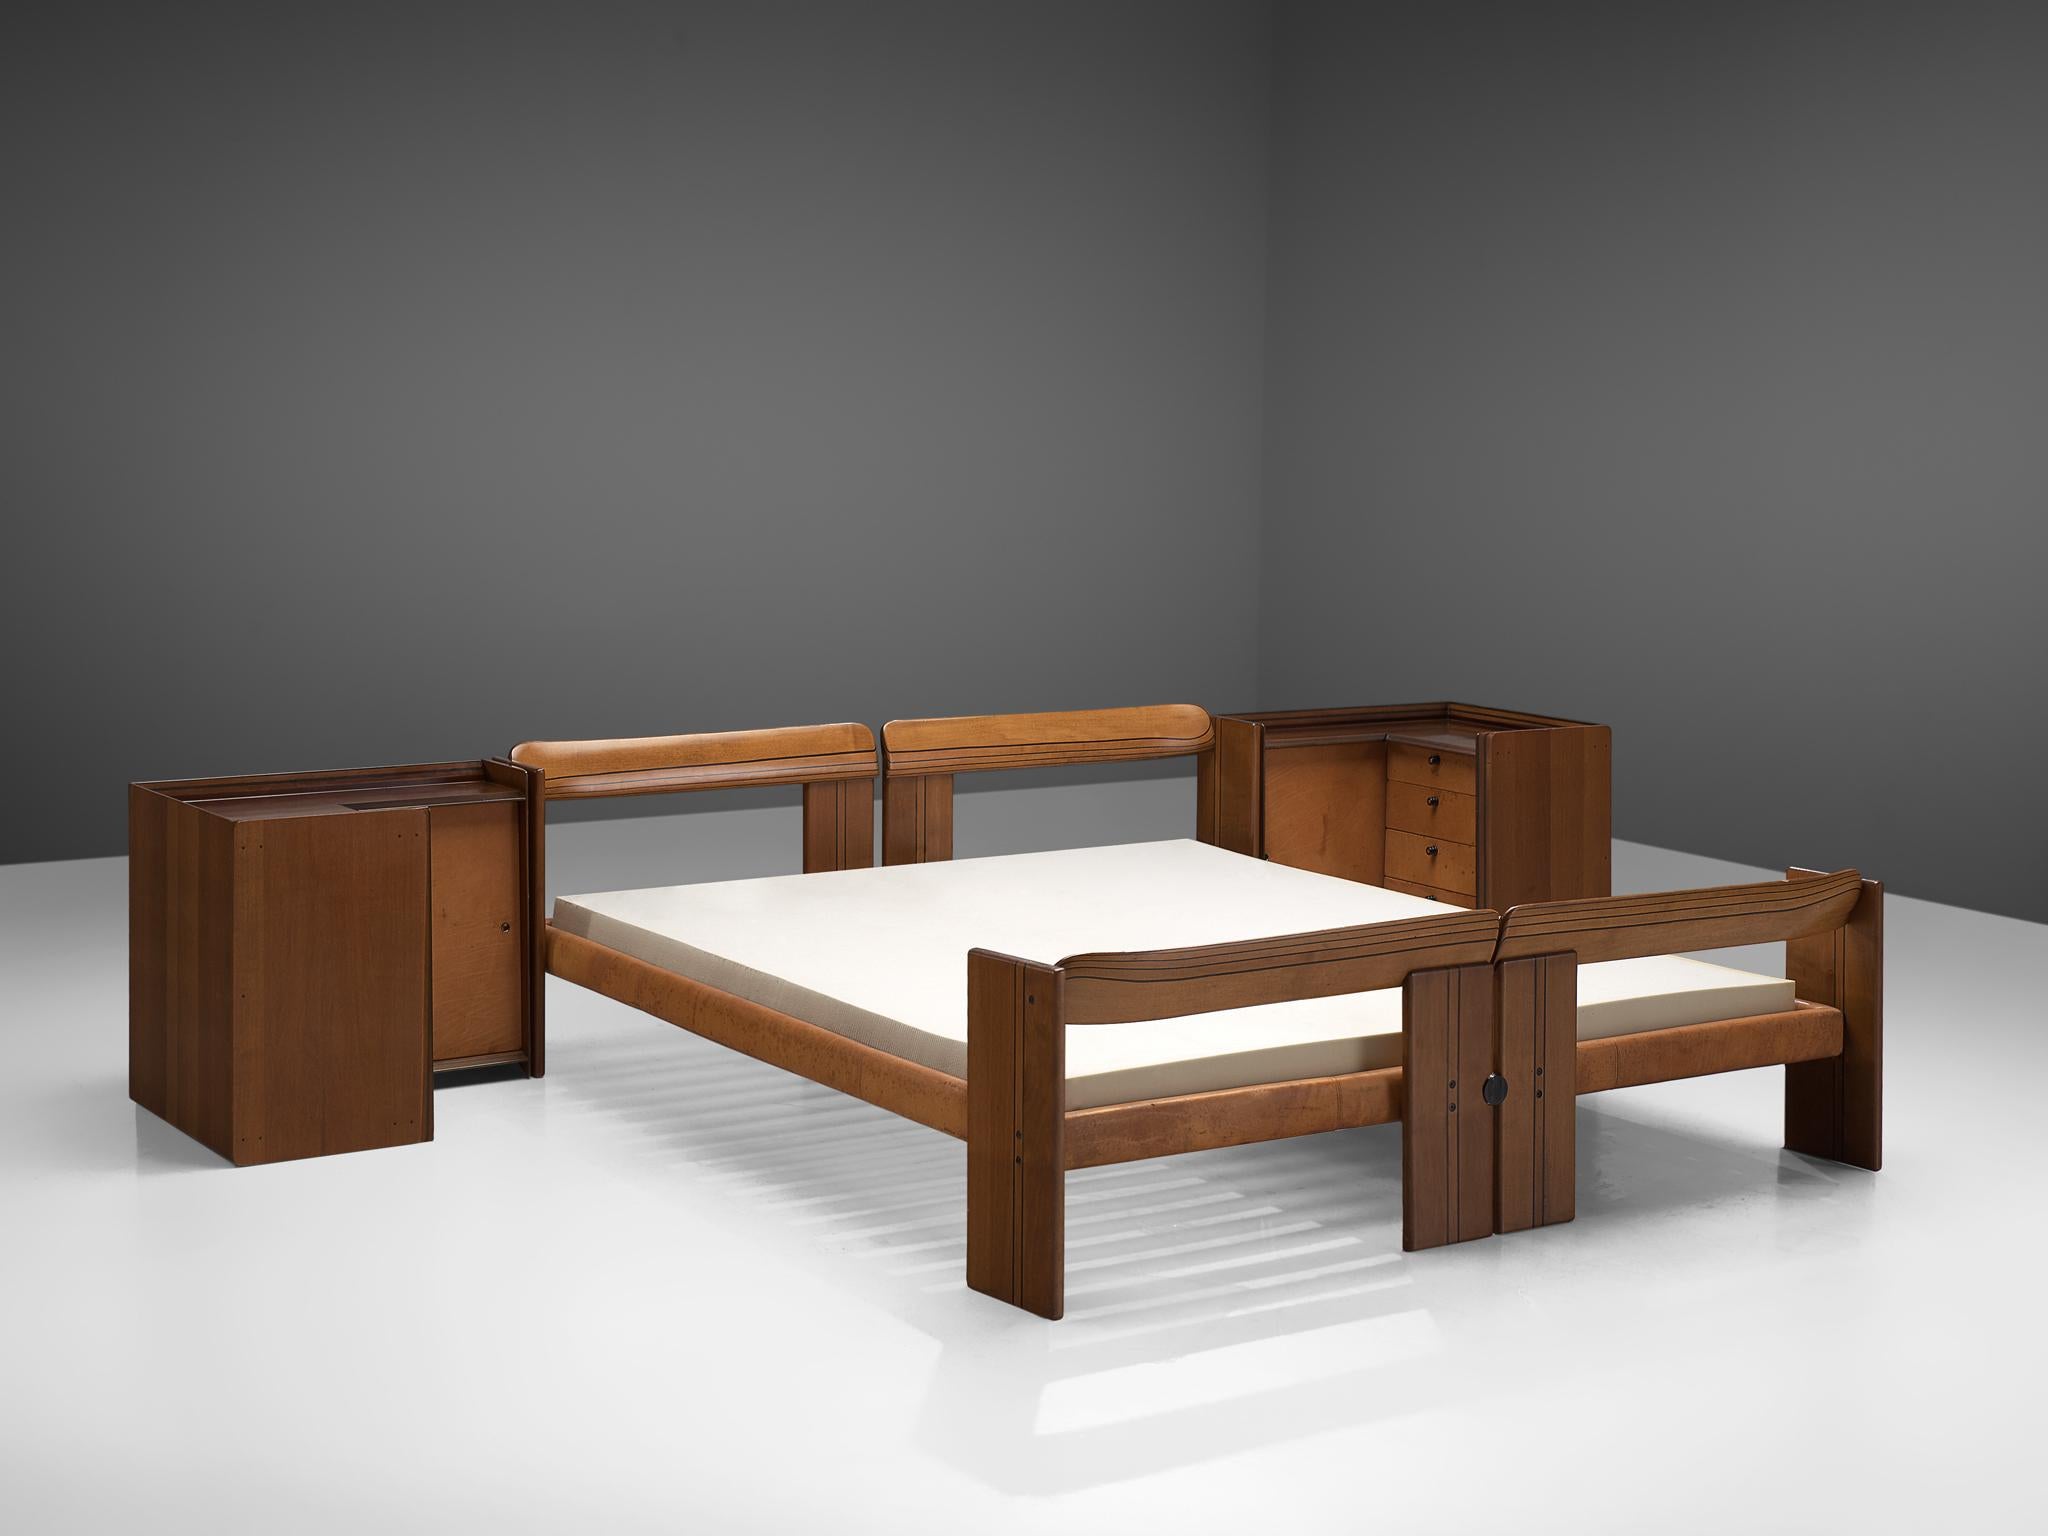 Afra & Tobia Scarpa, 'Artona' king size bed with nightstands, walnut and metal, Italy, 1975.

The Artona line by the Scarpa duo was in fact the first line ever produced by Maxalto, the specialist division of B&B Italia. Maxalto was originally set